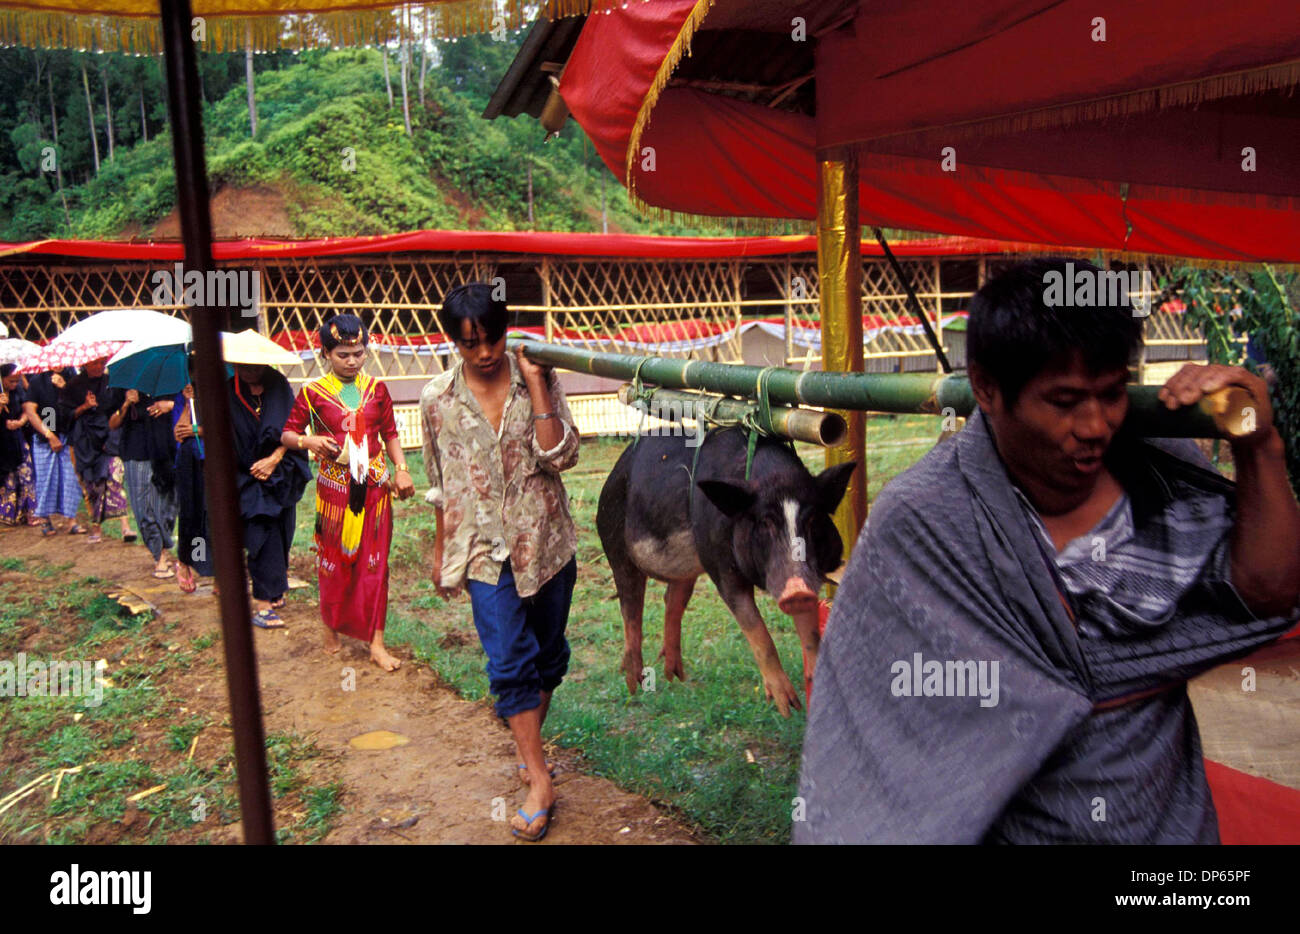 Oct 09, 2006; Toraja, South Sulawesi, INDONESIA; Guests carry a pig when visiting a Torajan funeral. A Torajan funeral is the most important of all Torajan ceremonies as it concerns with sending a dead person to the afterworld.  Without proper funeral rites, the spirit of the deceased will cause misfortune to its family. Mandatory Credit: Photo by Edy Purnomo/JiwaFoto/ZUMA Press. ( Stock Photo